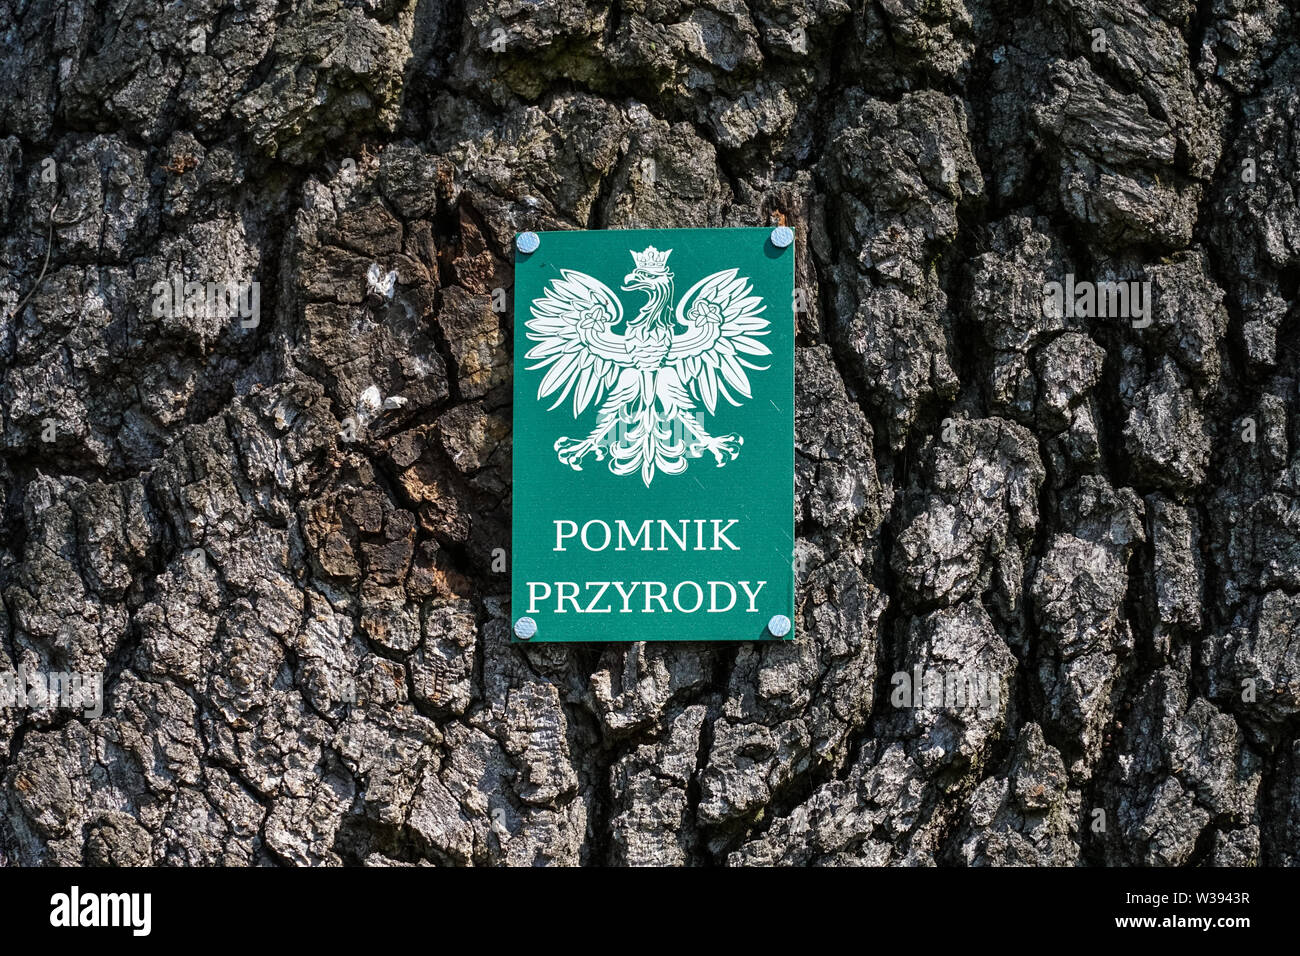 Natural monument sign on an old tree, Poland Stock Photo